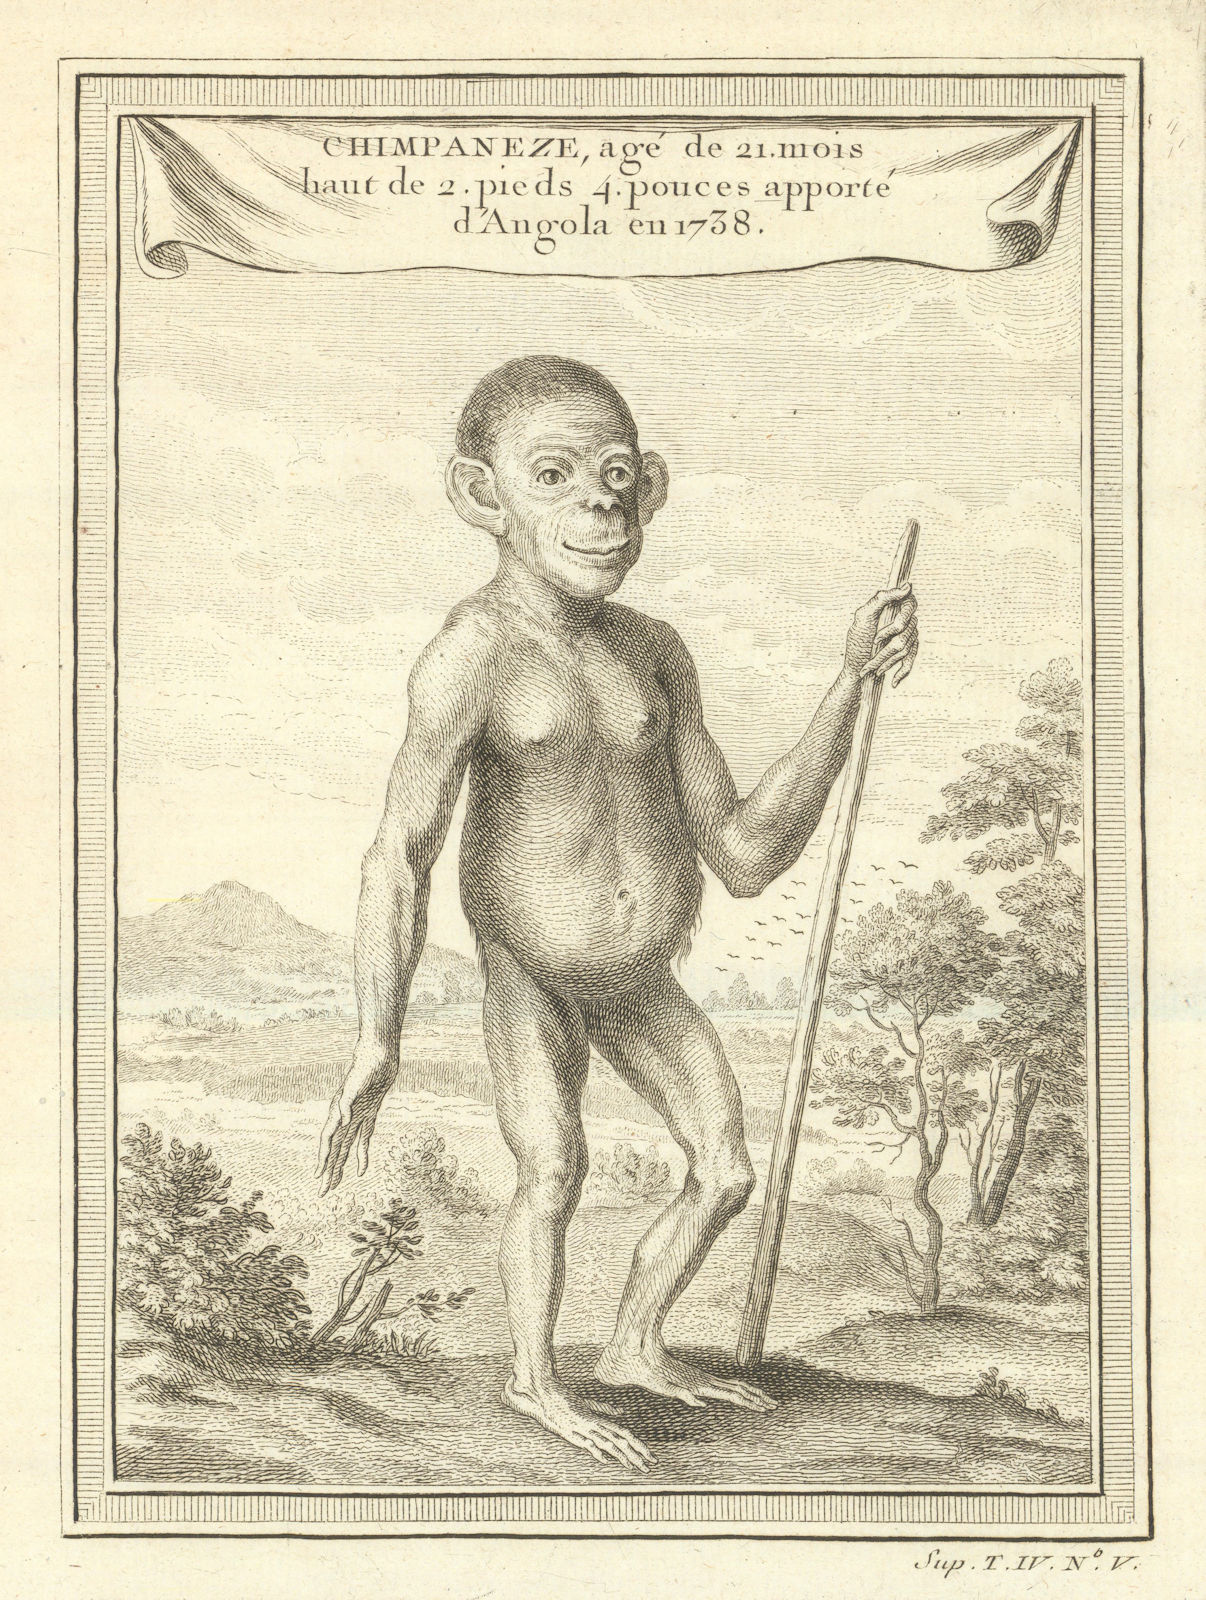 Chimpaneze, 21 months old, brought from Angola in 1738. BELLIN 1747 print